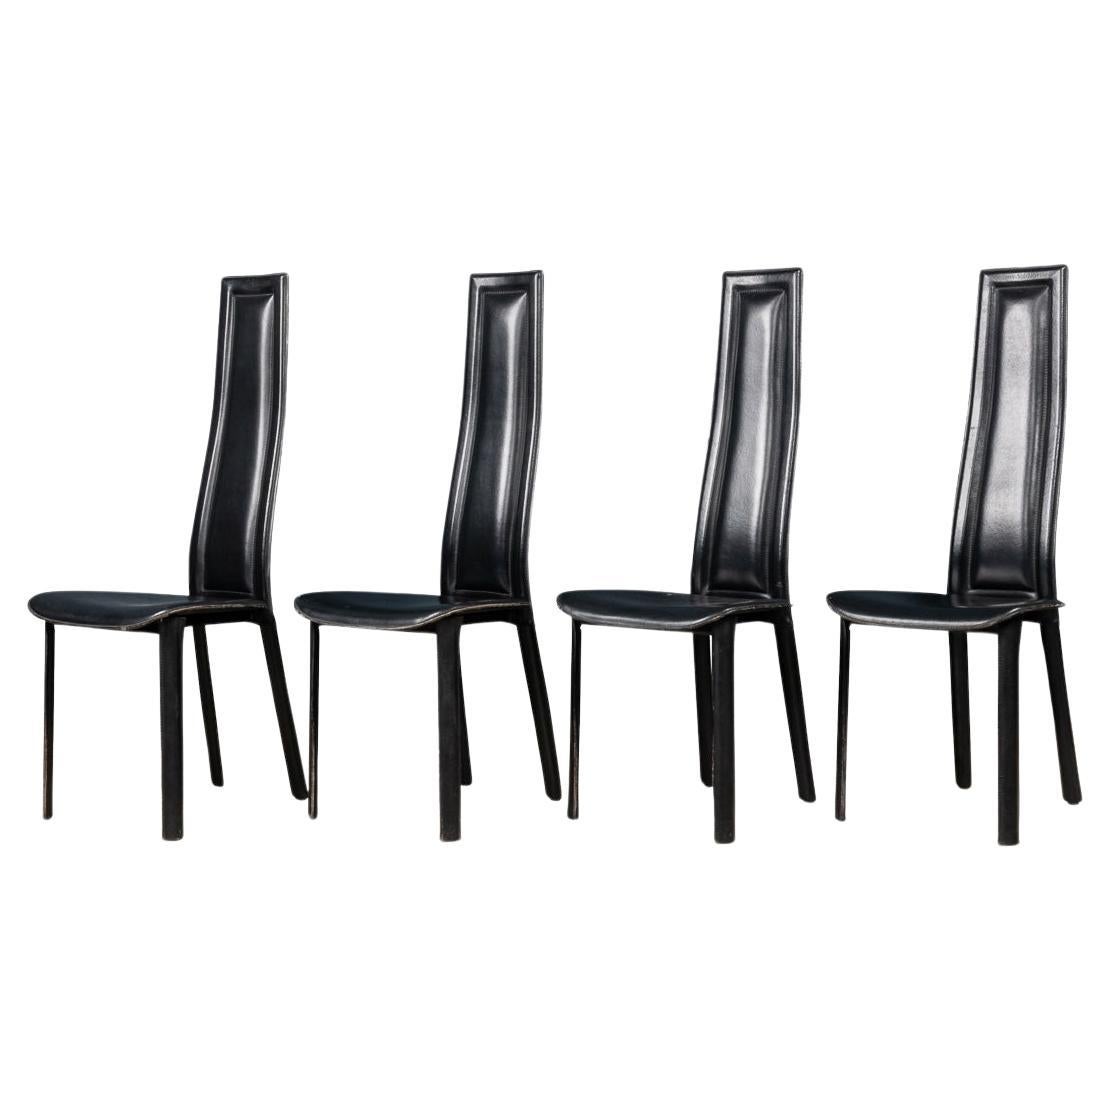 20th Century Italian Set Of Four Dining Chairs By Giorgio Cattelan For Emmepi For Sale